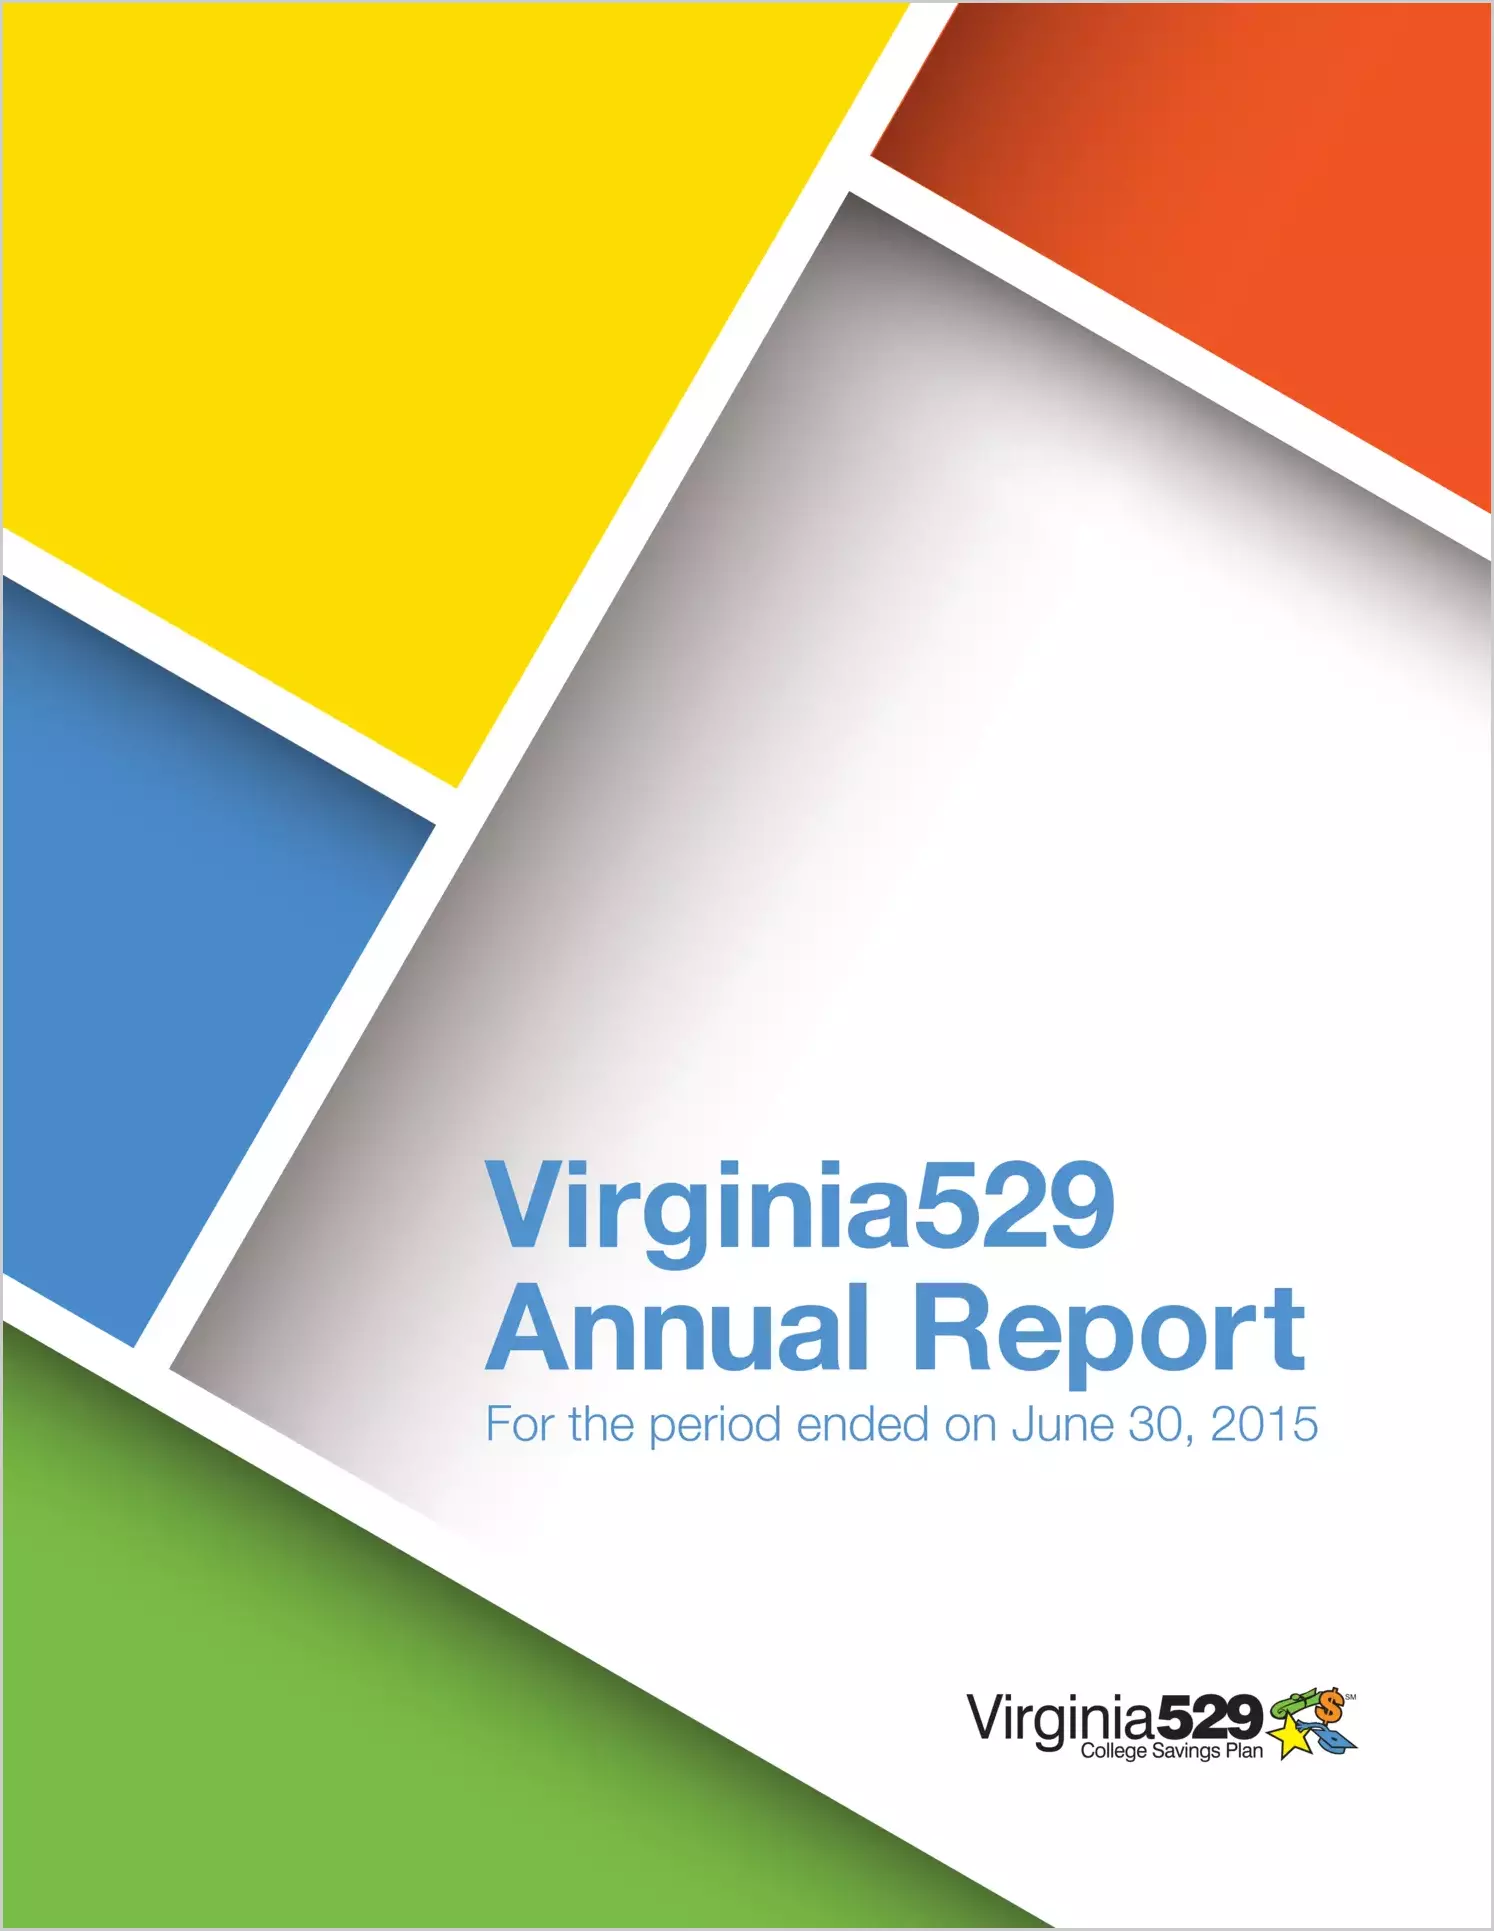 Virginia College Savings Plan Financial Statements for the year ended June 30, 2015